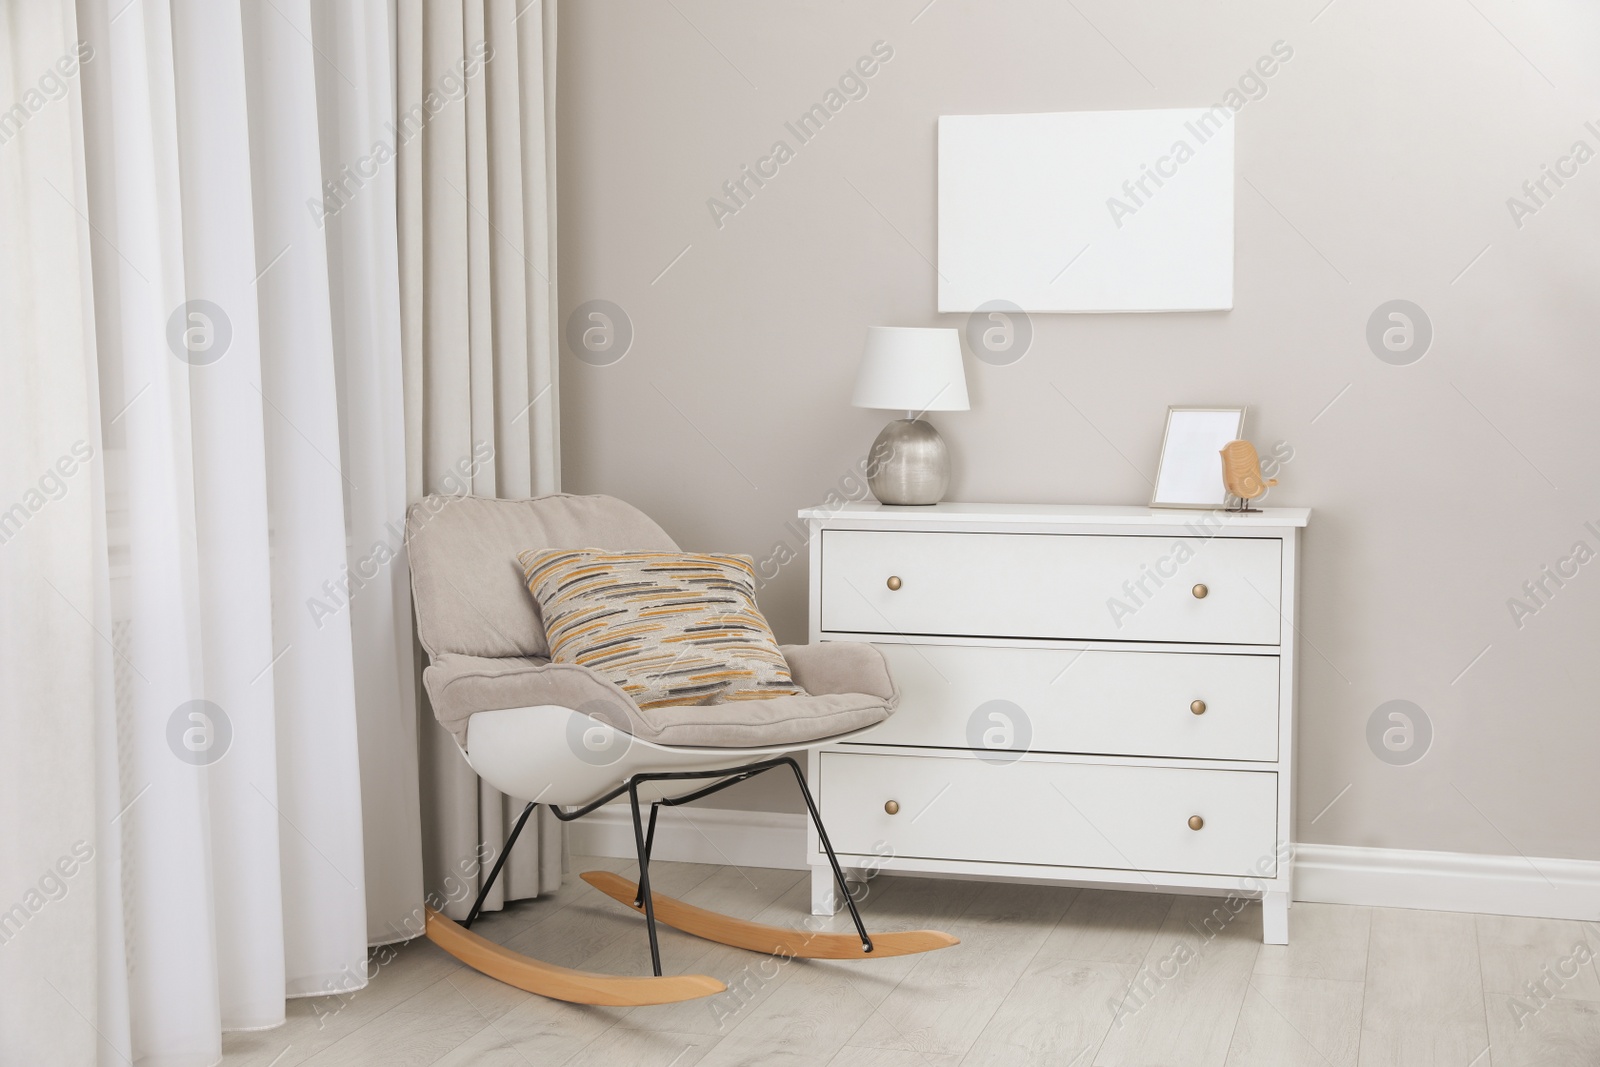 Photo of Blank canvas on wall over chest of drawers with decor in room. Space for design